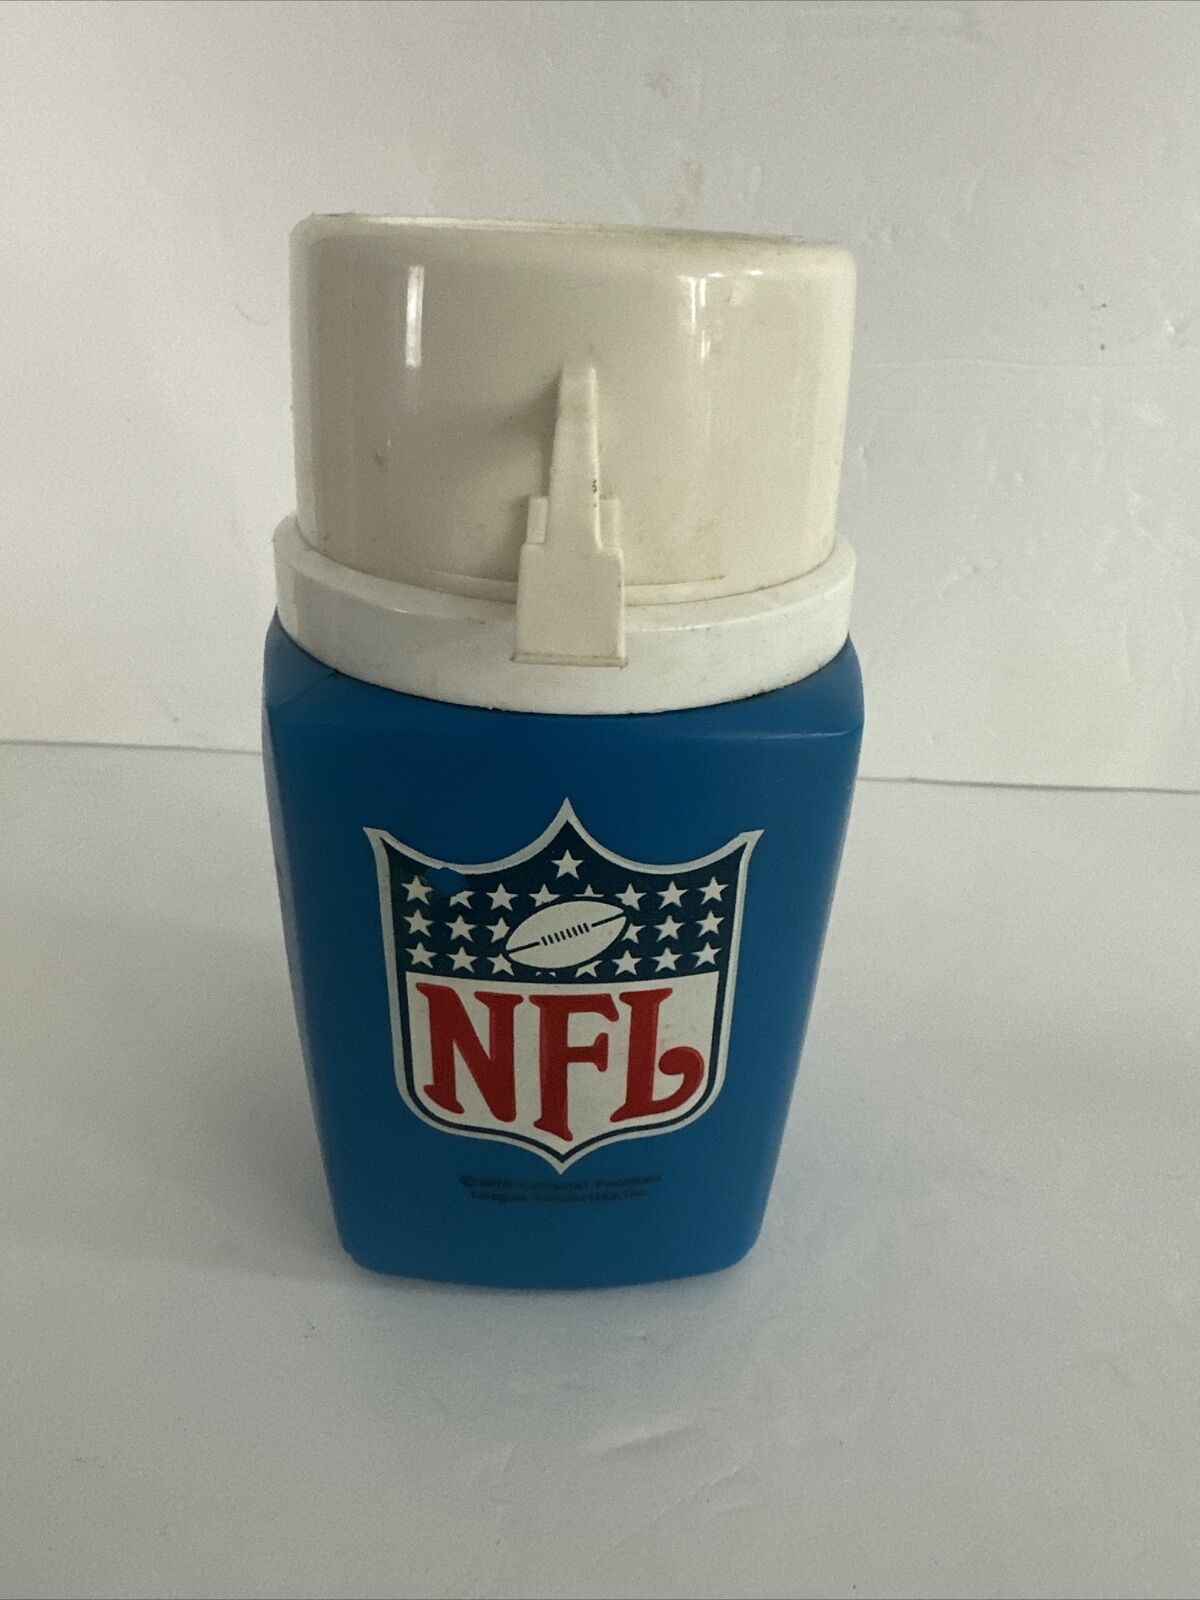 Vintage 1975 NFL Lunchbox Thermos by Thermos 8 Oz. National Football League